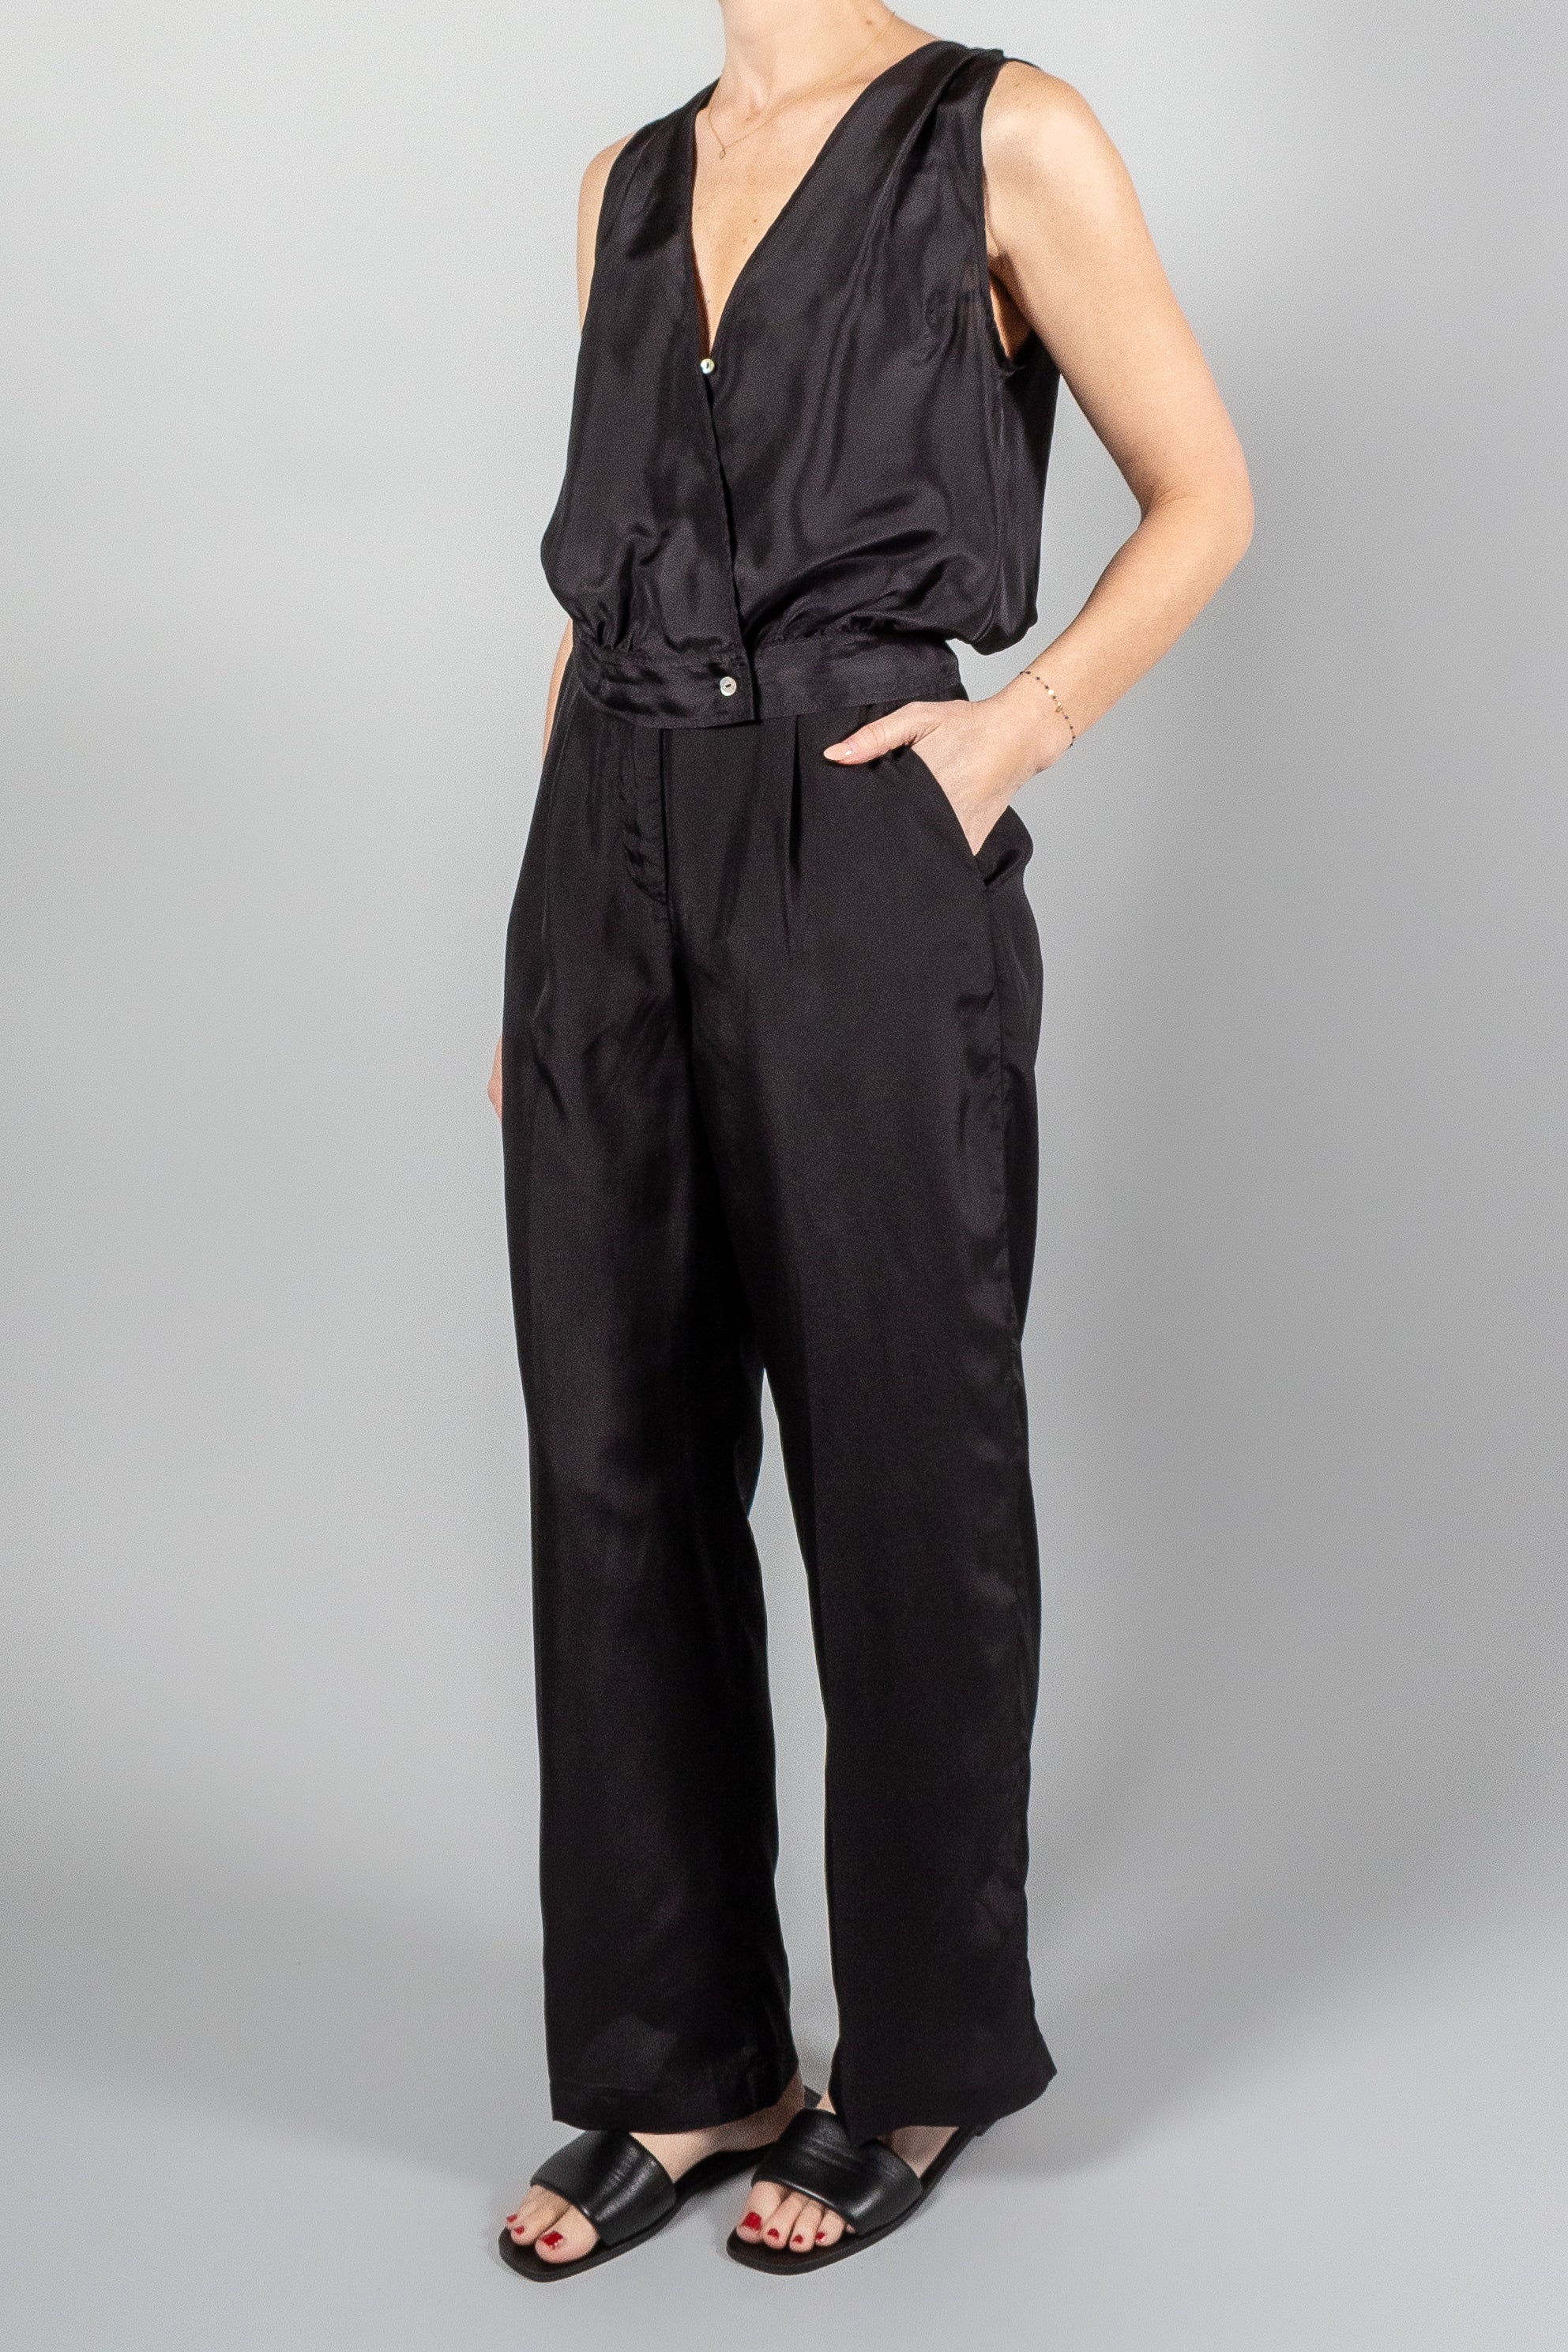 Forte Forte Habotai Silk High Waist Pants-Pants and Shorts-Misch-Boutique-Vancouver-Canada-misch.ca